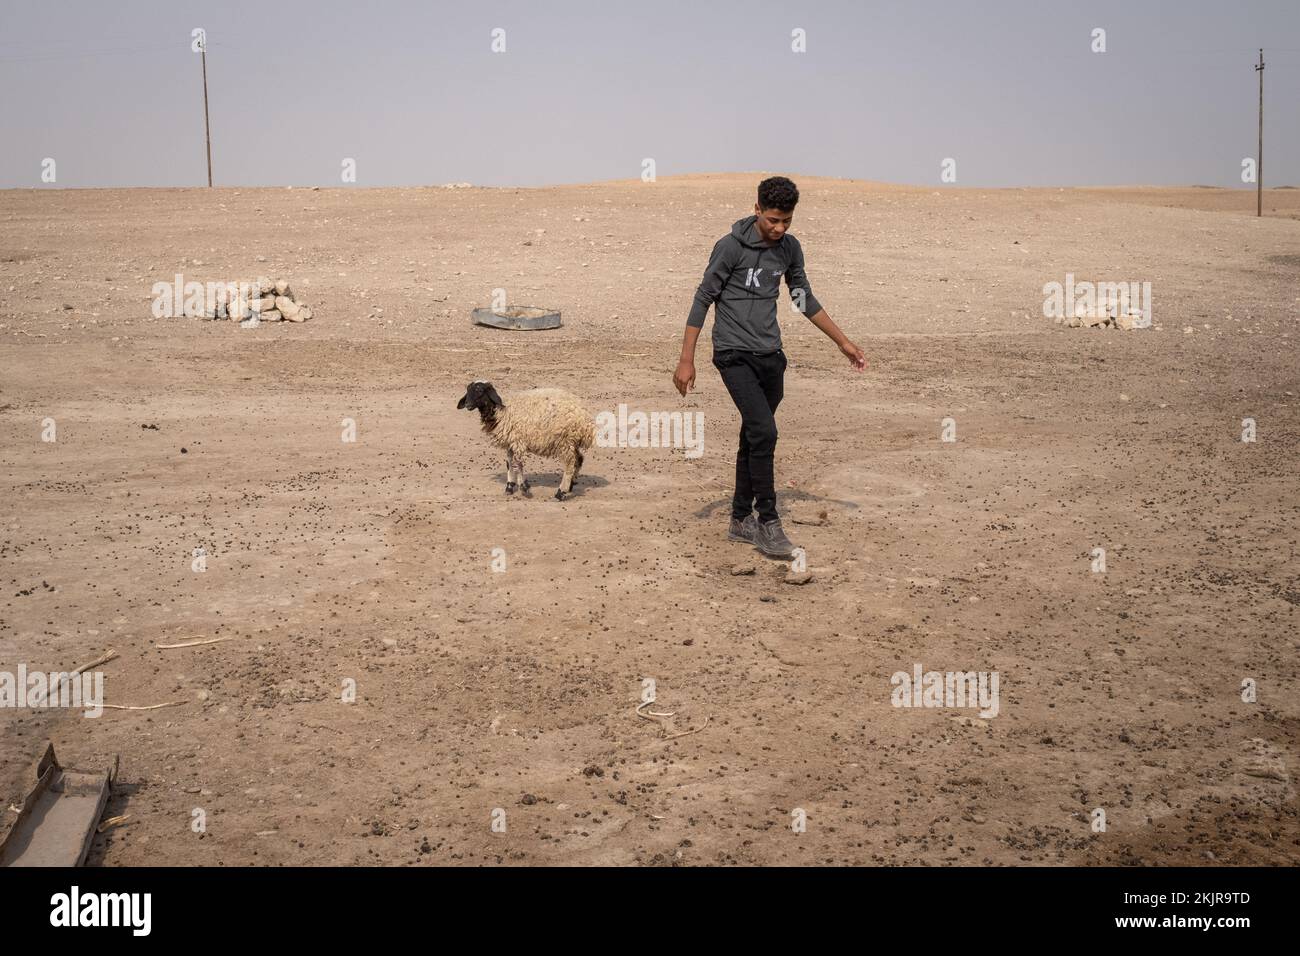 Iraq, Ninawa province, Tall Afar on 2022-10-17. Report on explosive remnants of war in Iraq, one of the most contaminated countries in the world after Stock Photo